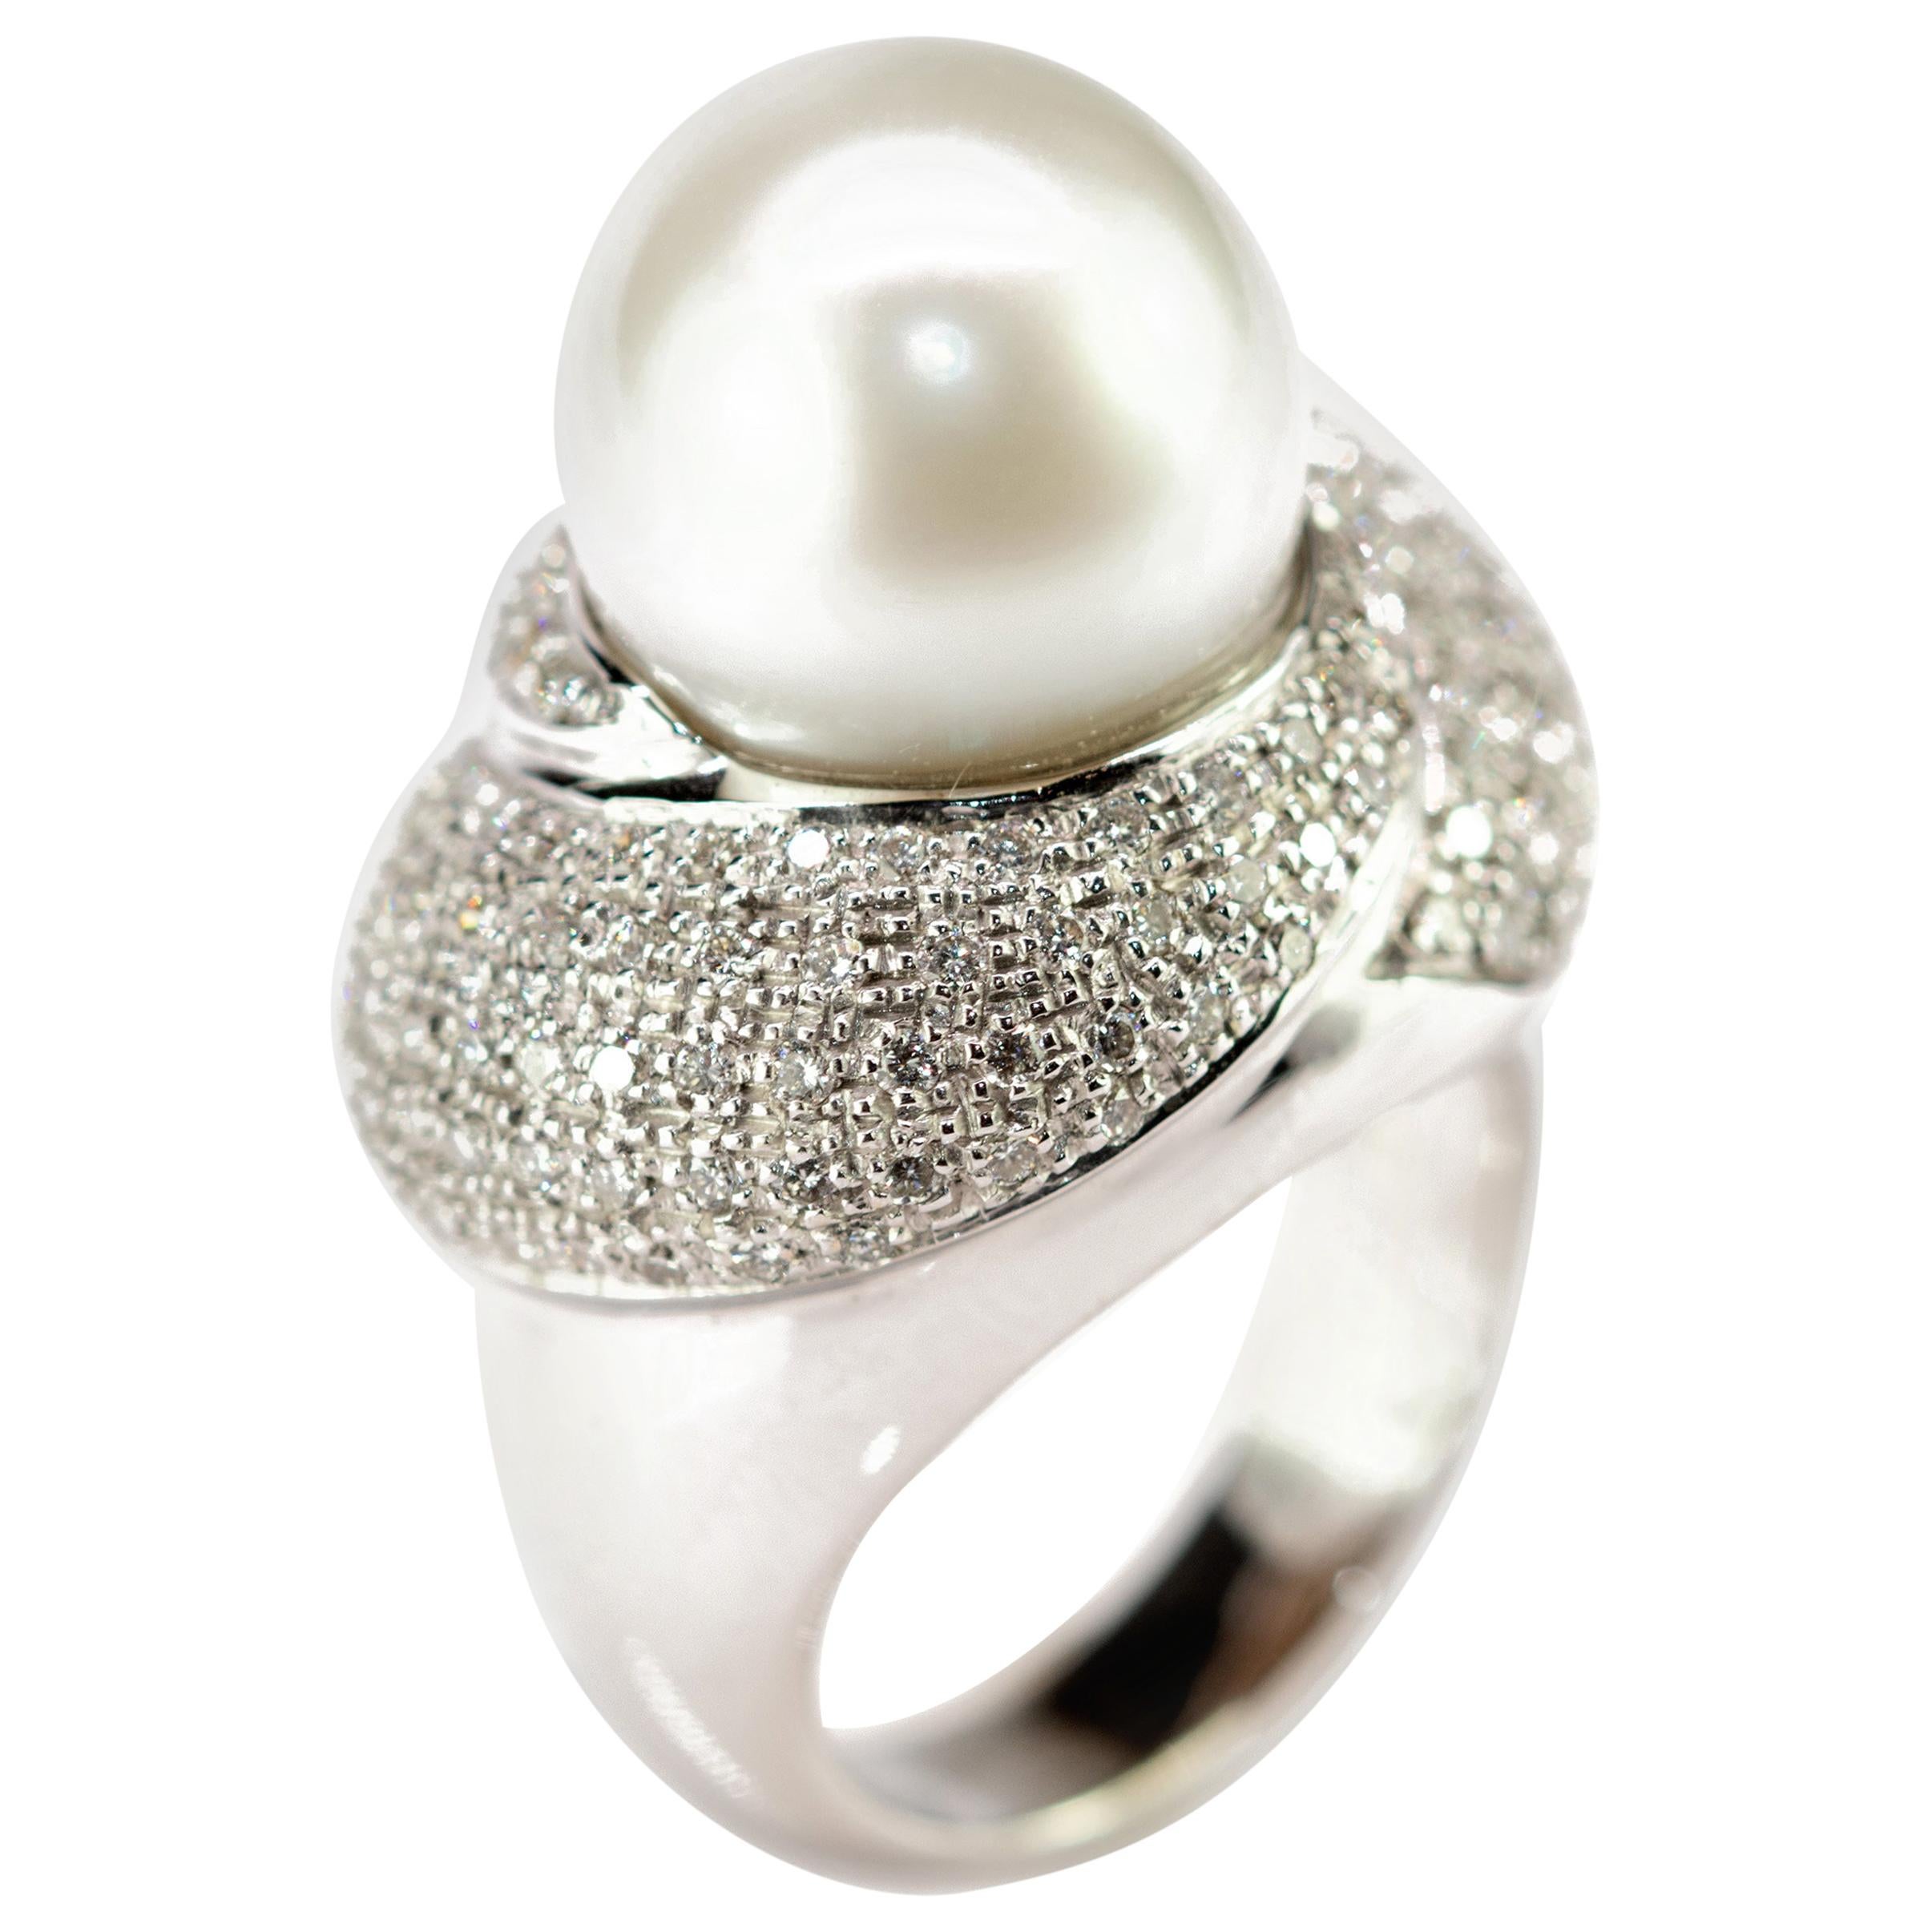 Akoya Cultured Pearls and White Diamonds on White Gold 18 Karat Dome ...